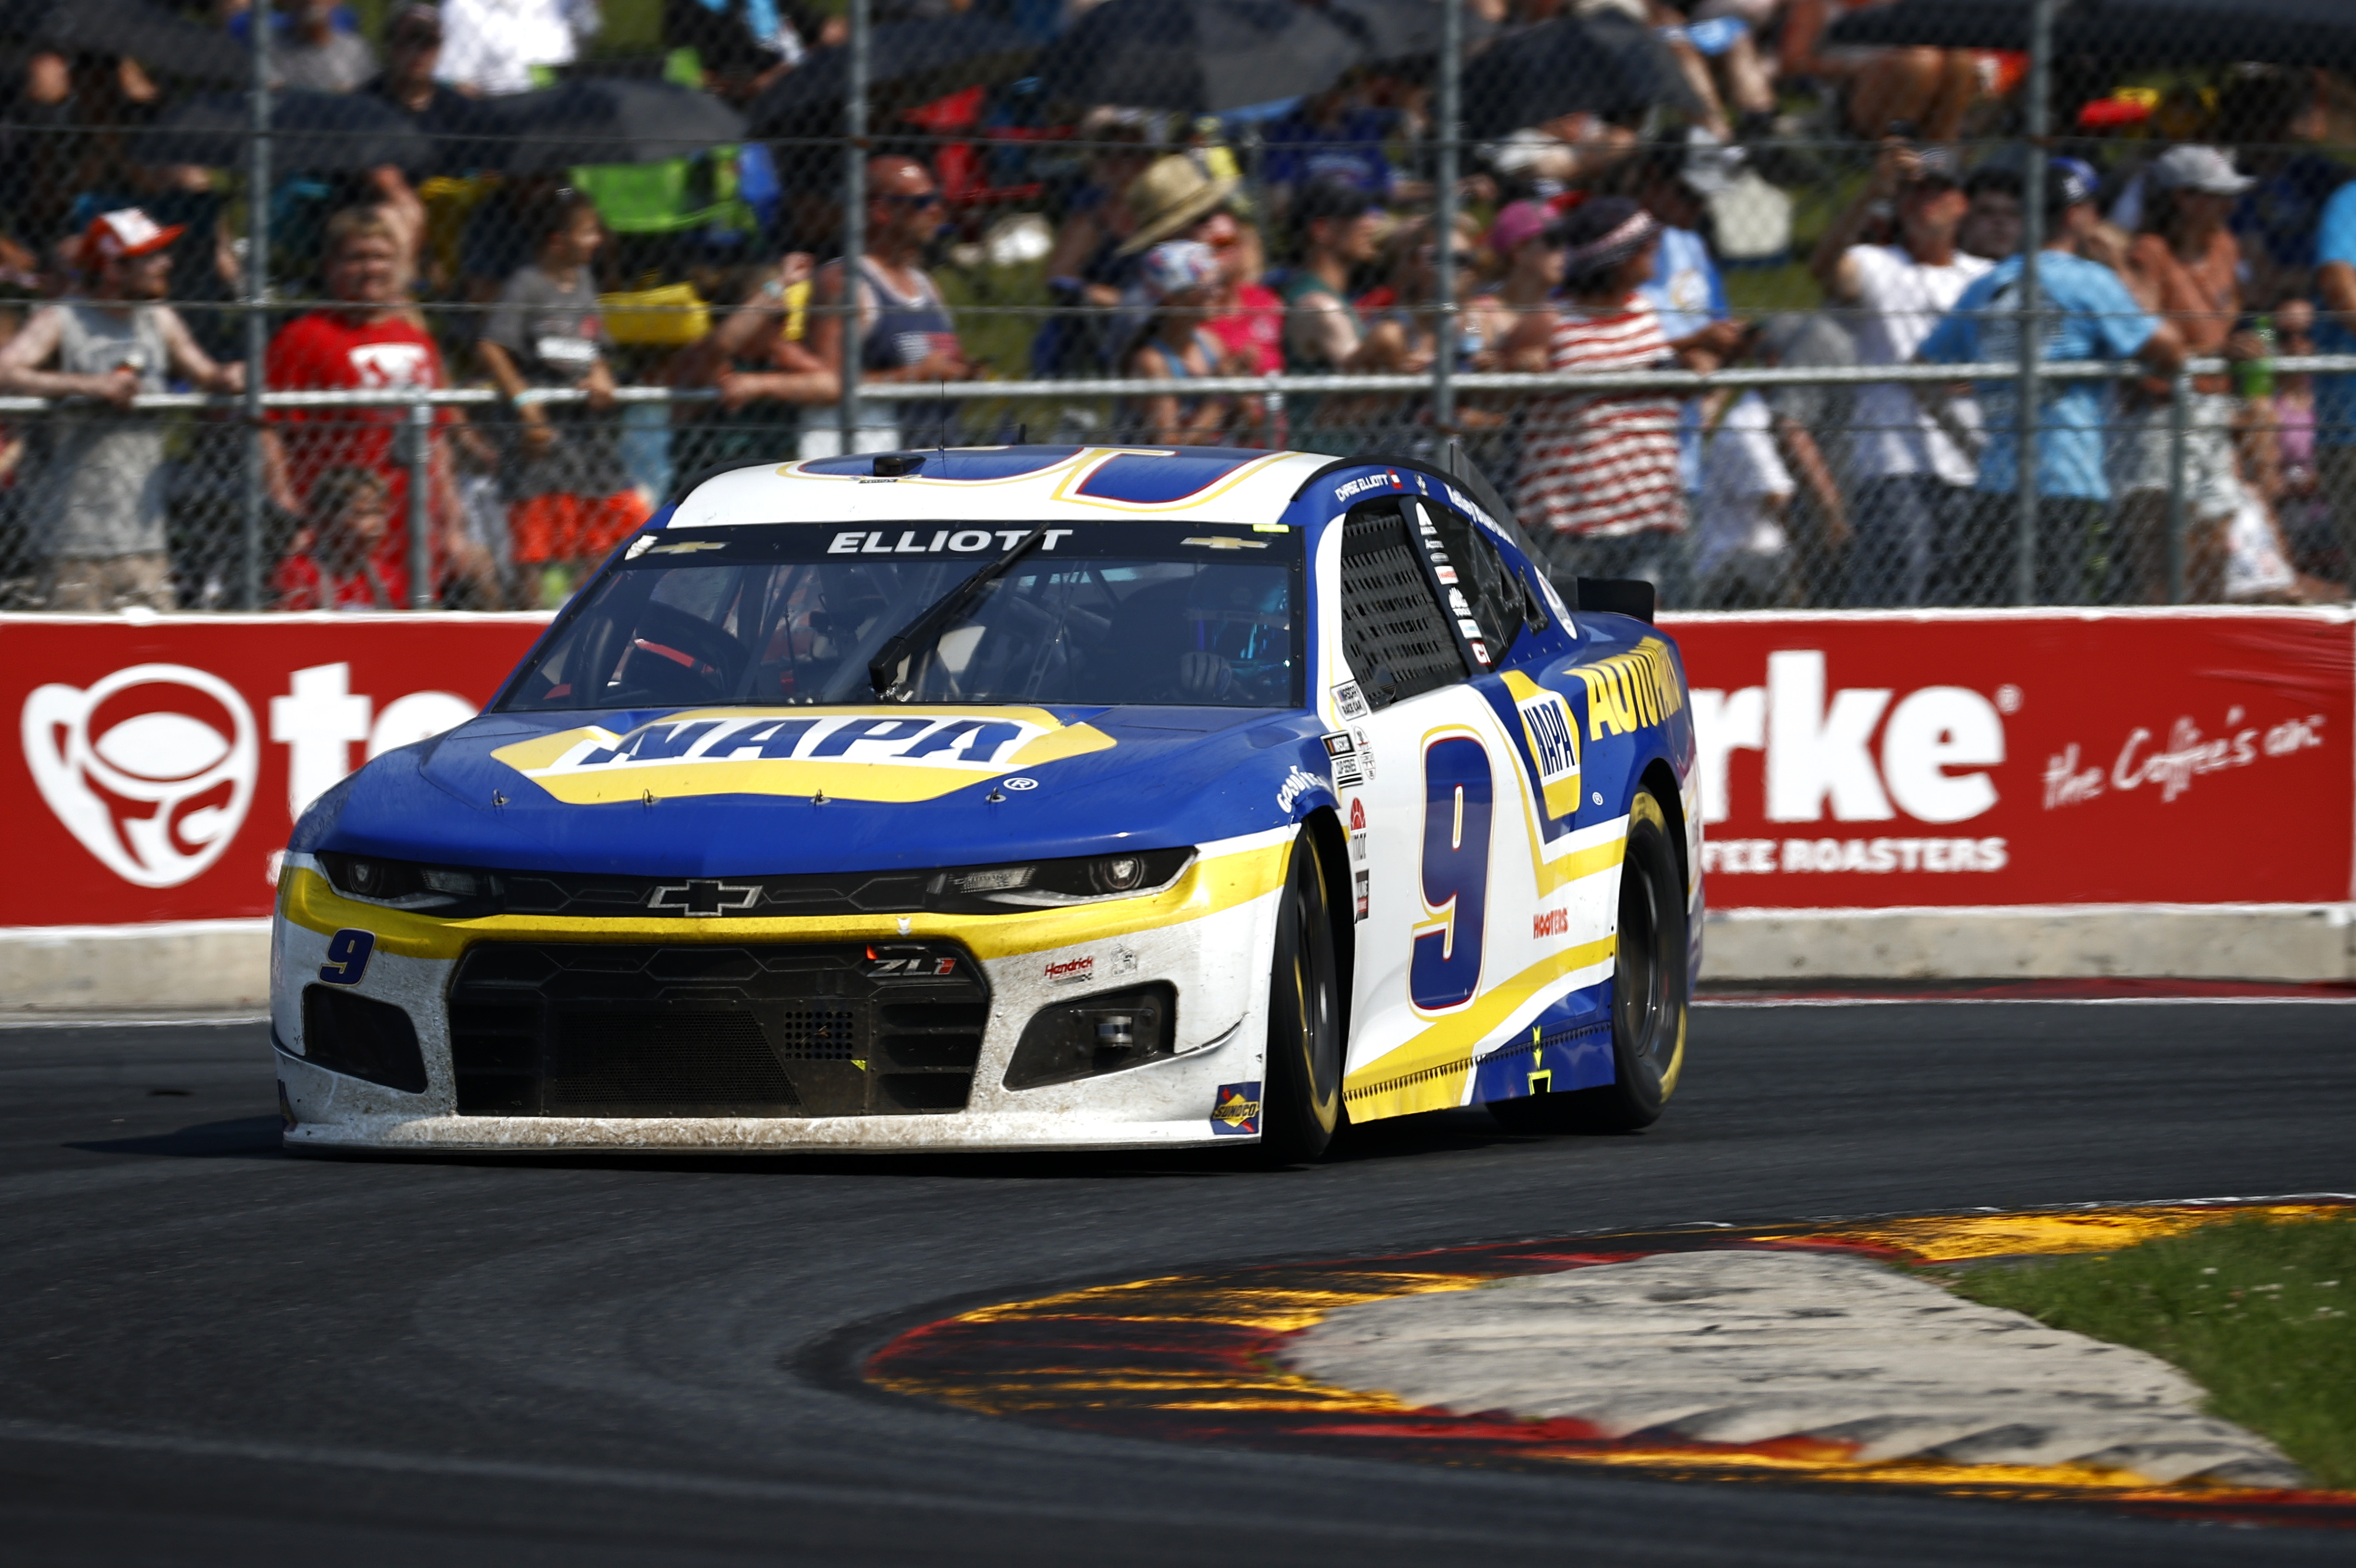 NASCAR at Road America 2021 Results: Chase Elliott Wins 1st Race at Track Since ..